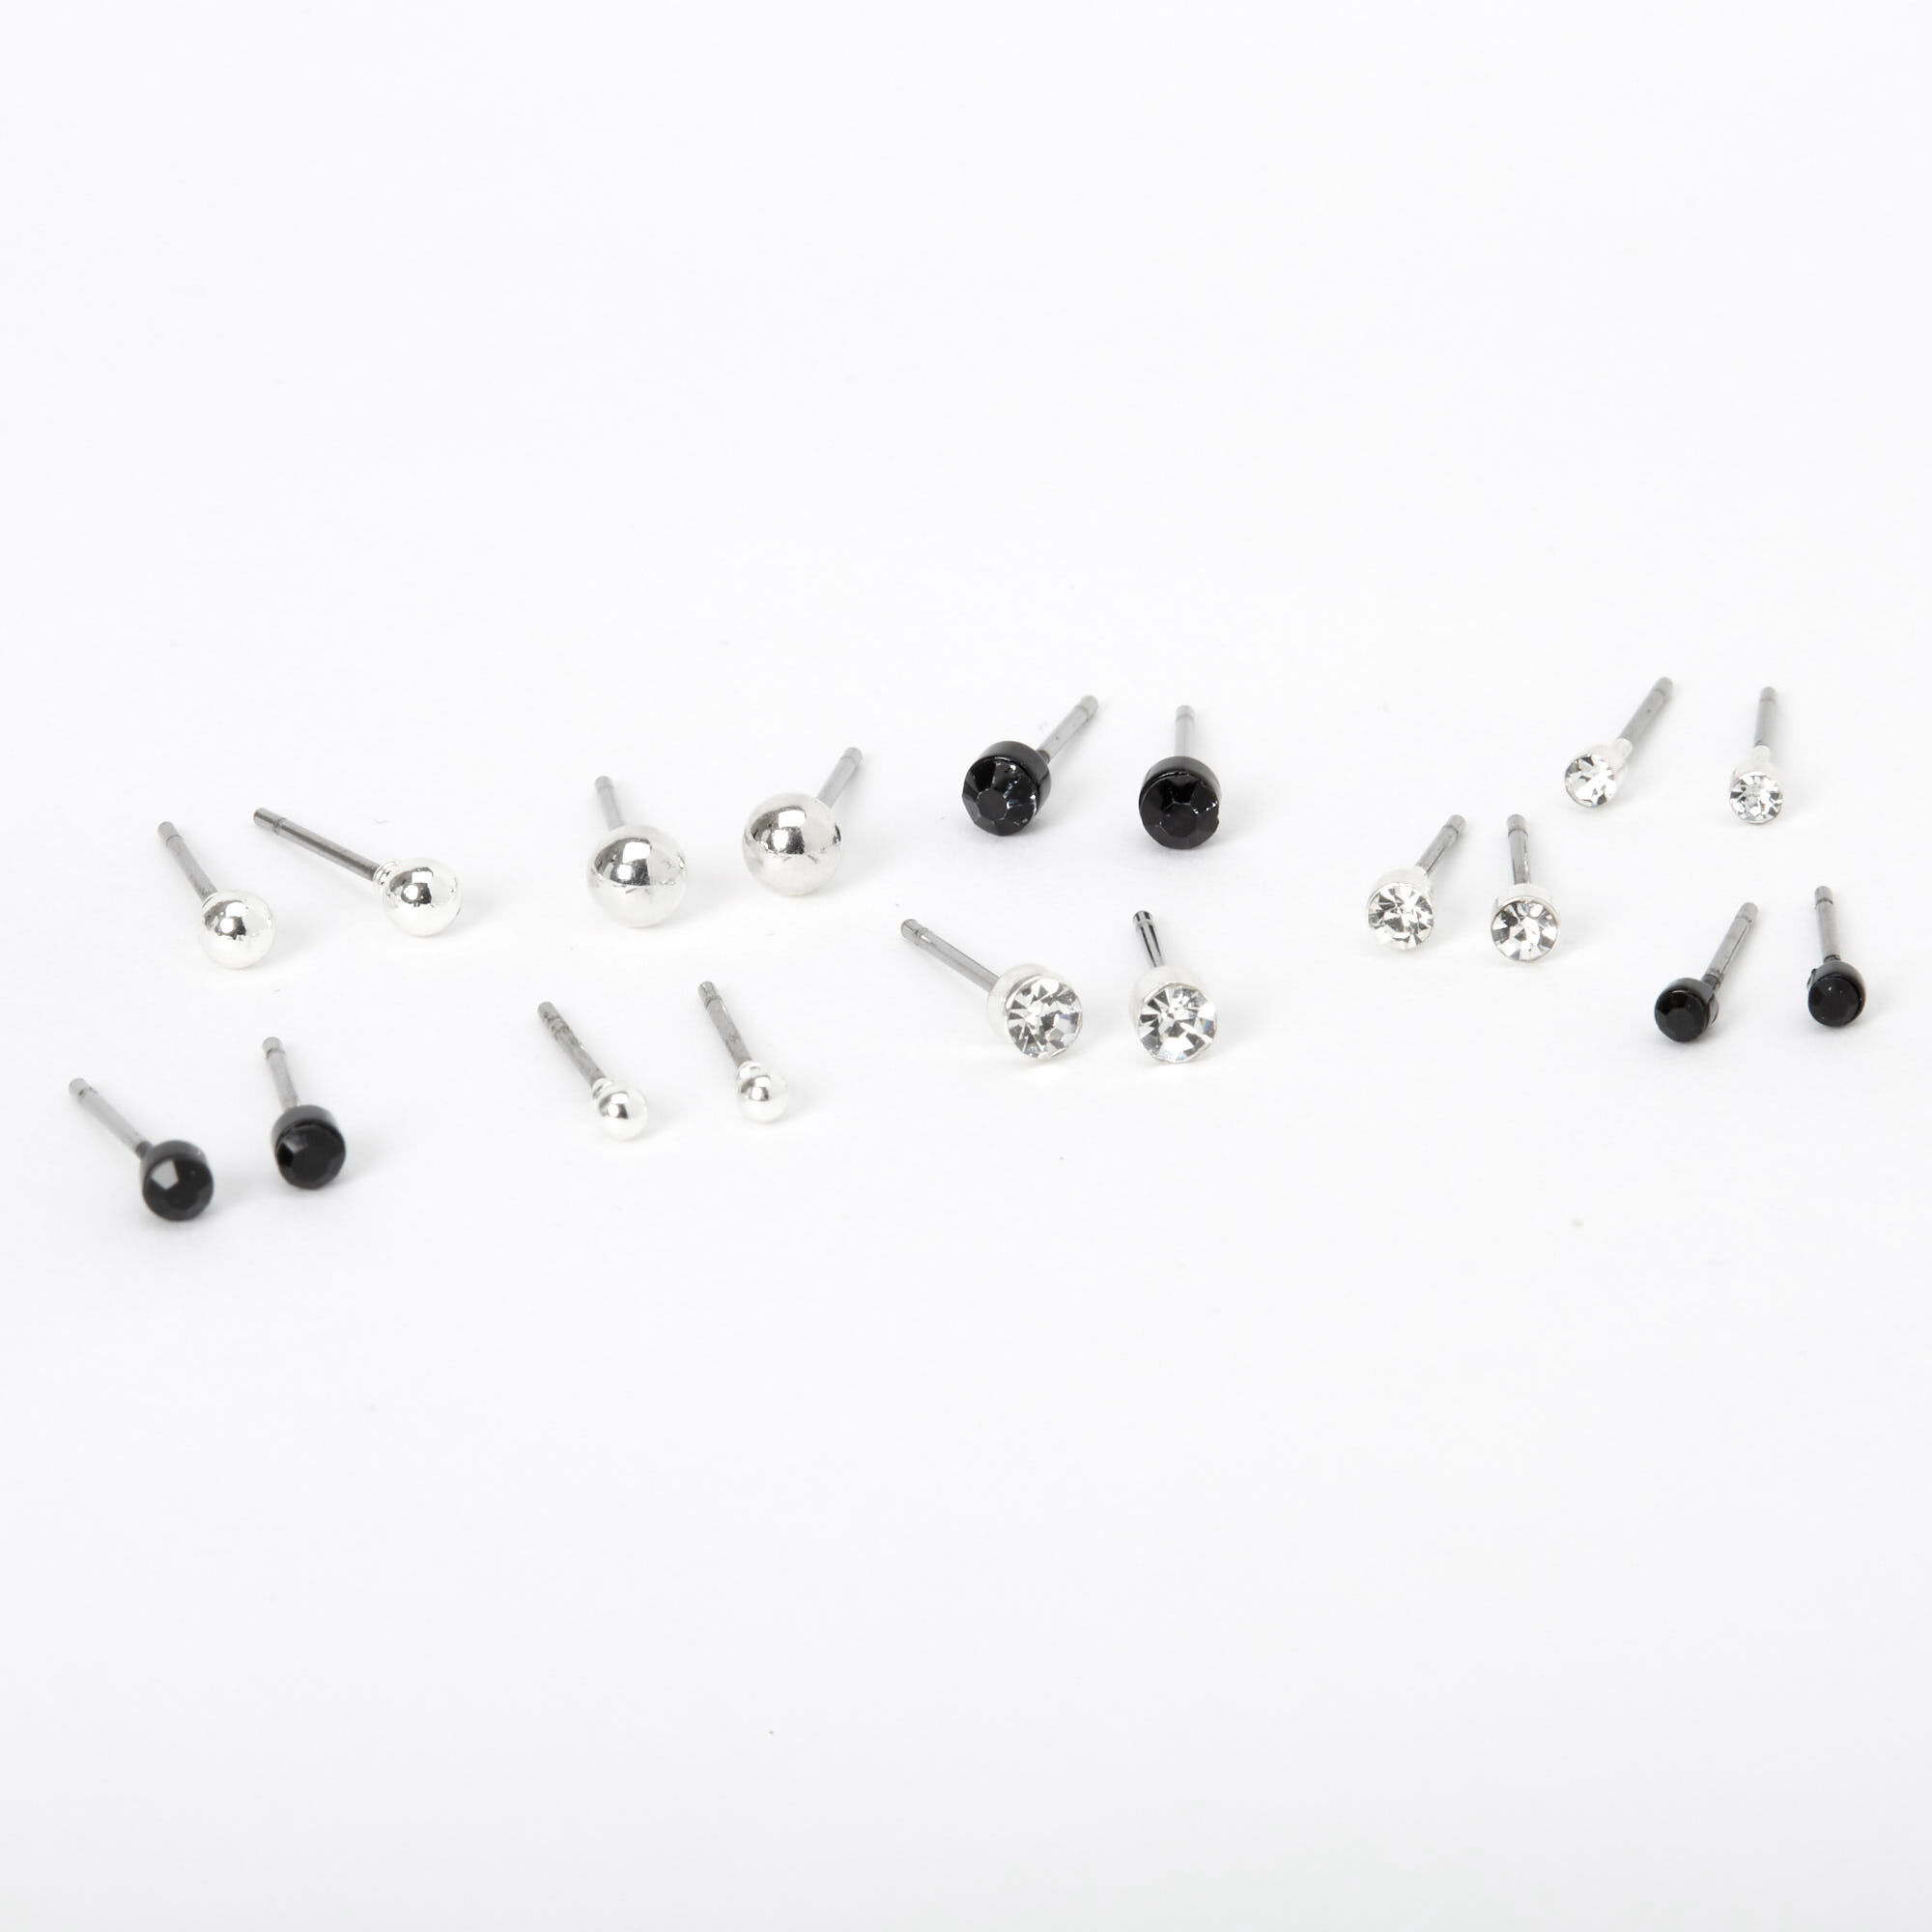 View Claires SilverTone Crystal Ball Stud Earrings 9 Pack Black information